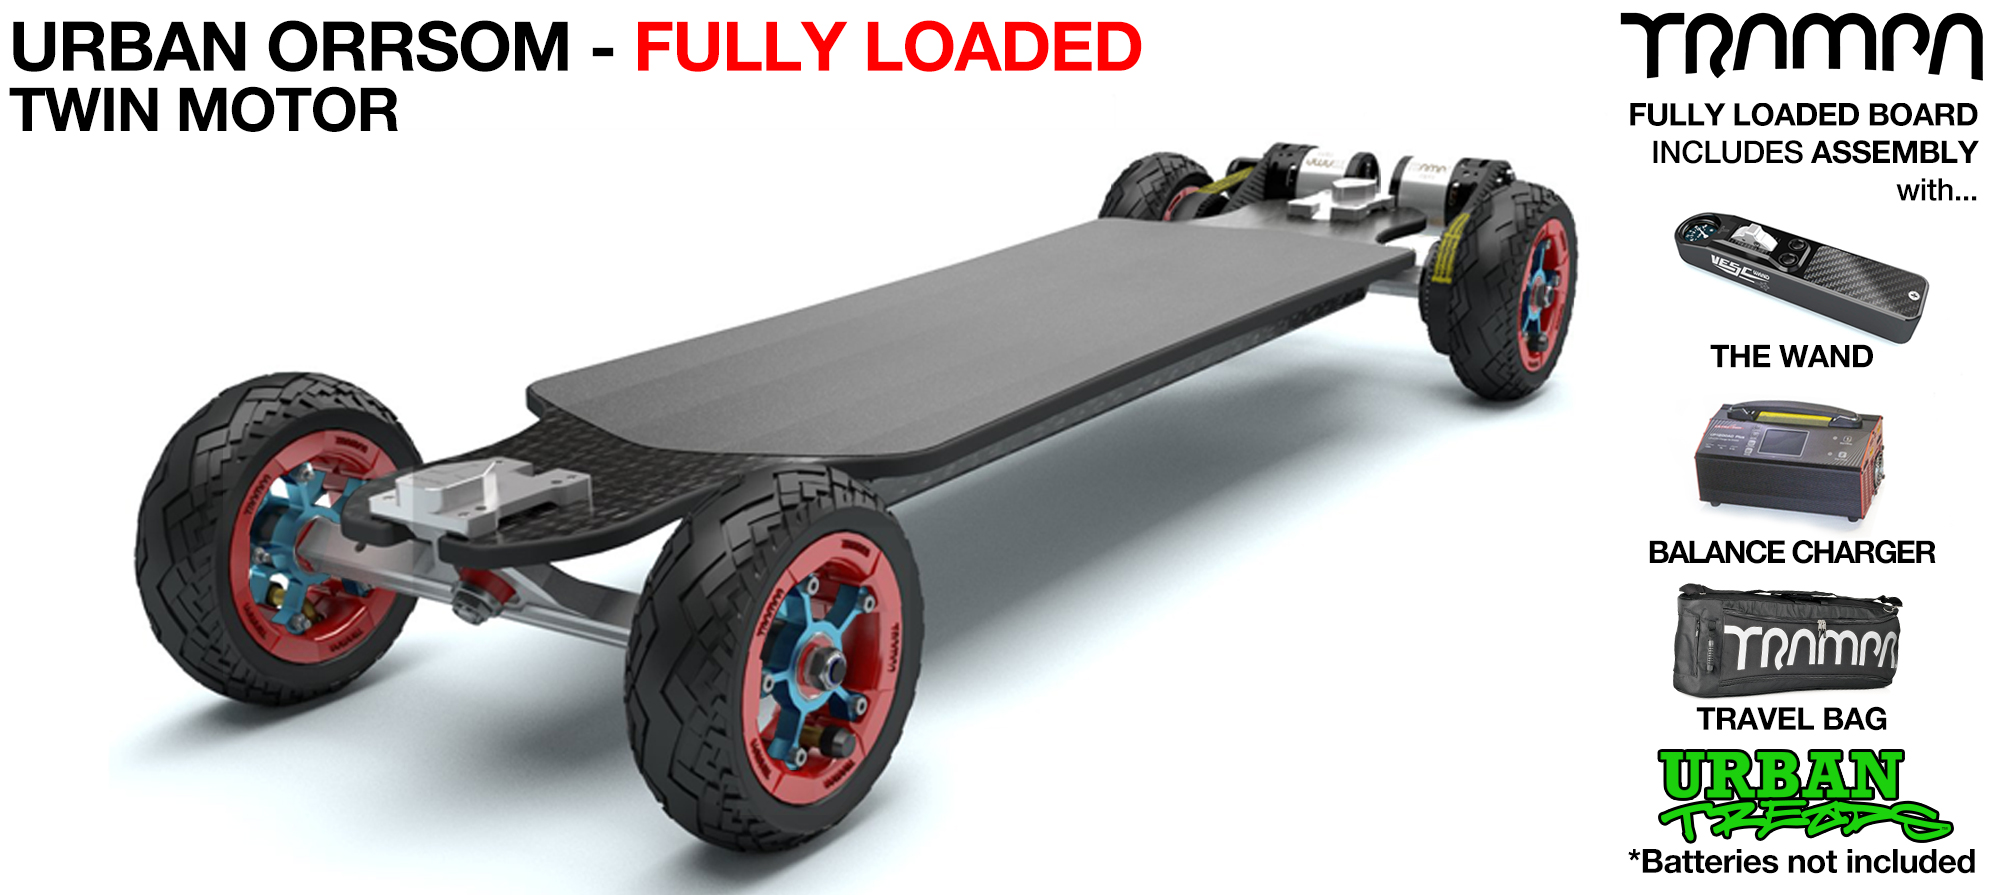 TRAMPA's 12FiFties ORRSOM Electric Longboard with URBAN TREADS Pneumatic Tyres TWIN Motor - FULLY LOADED